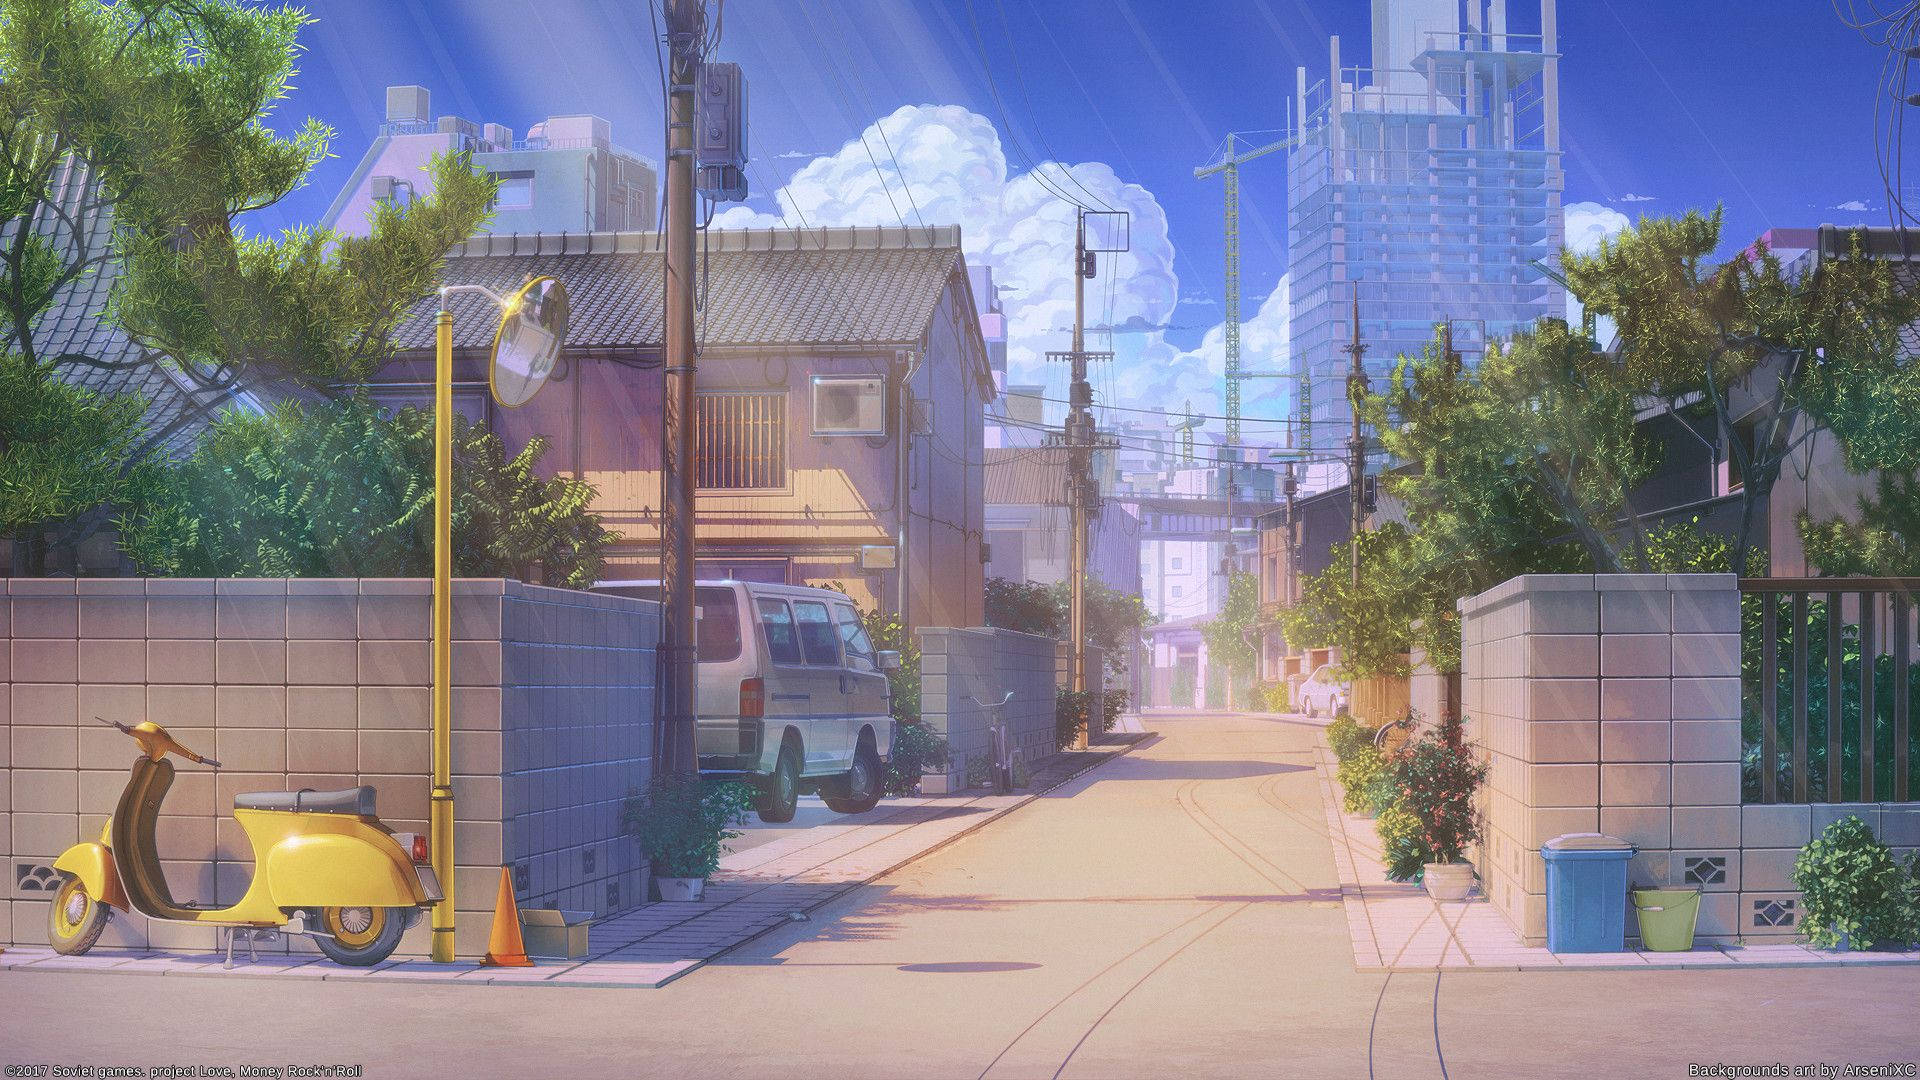 Download Japanese Anime Street In Daytime Wallpaper | Wallpapers.com